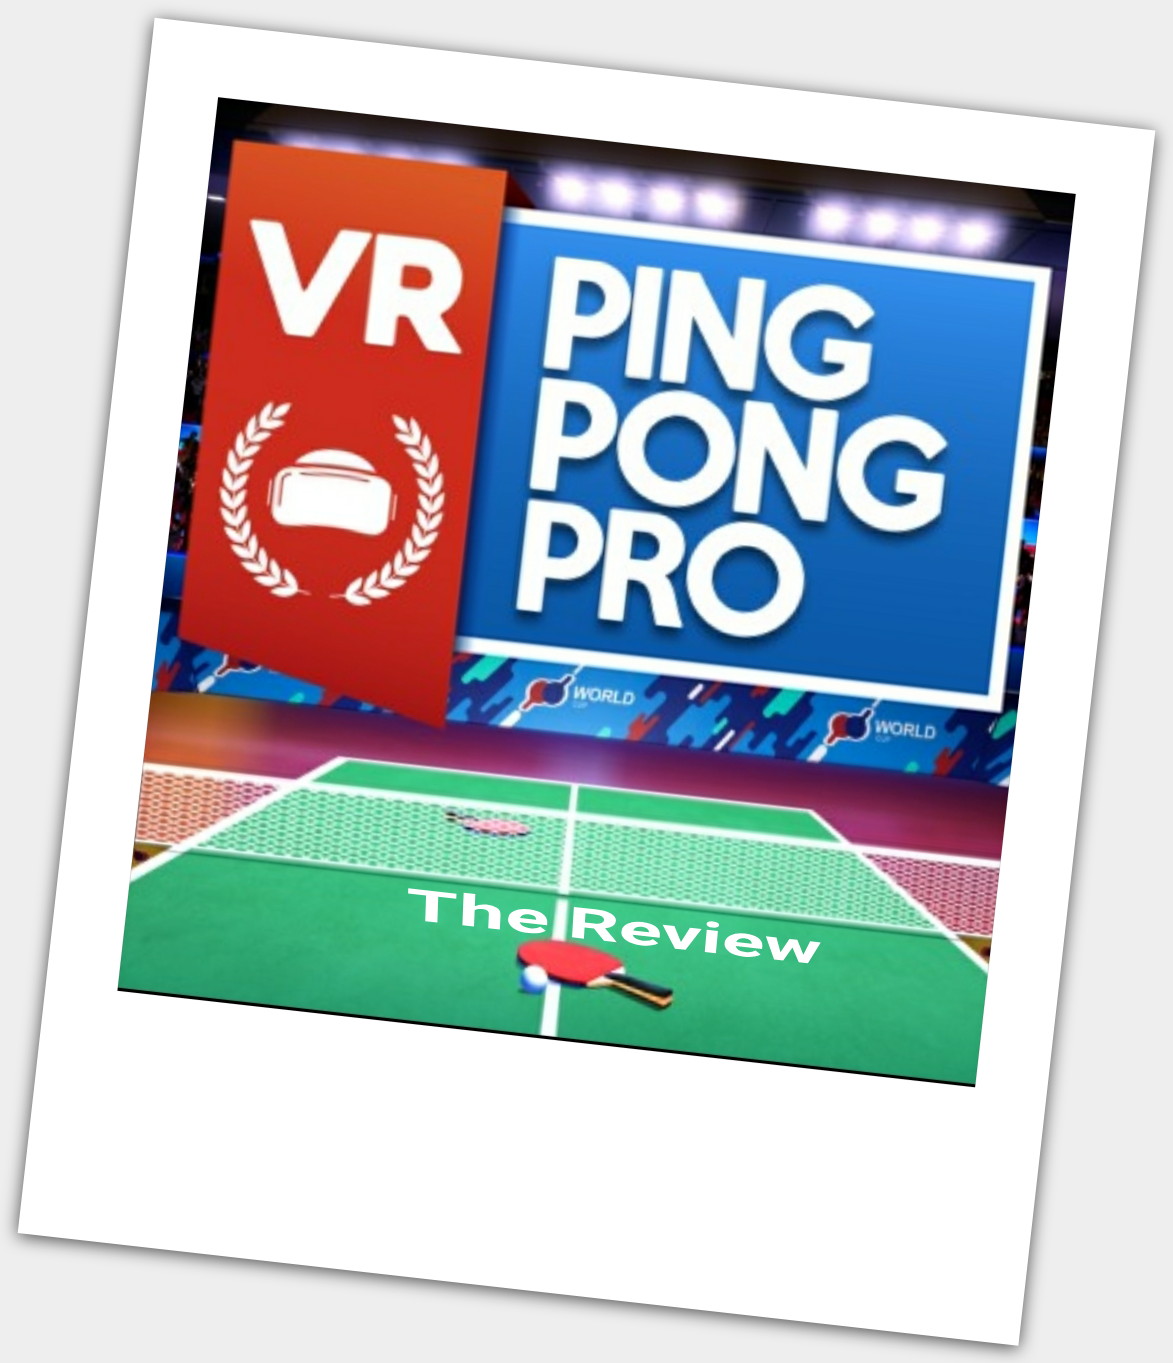 VR Ping Pong Pro on Steam